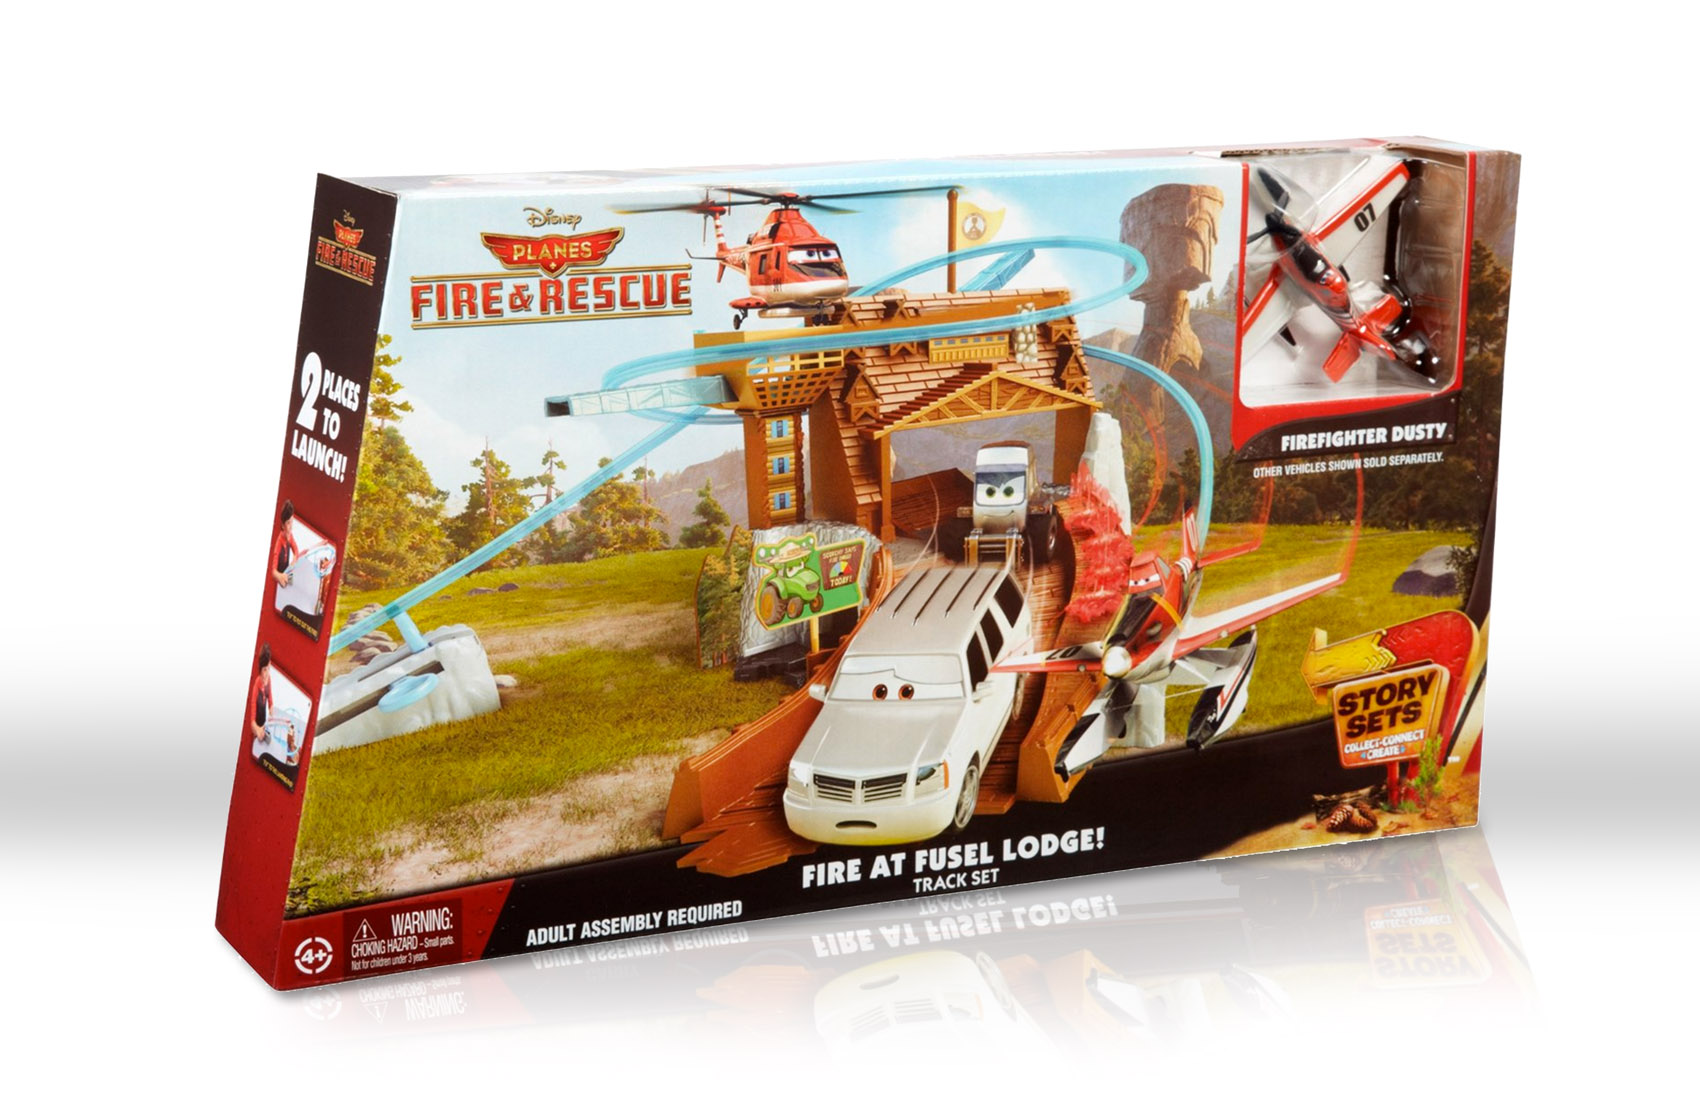 Disney Planes Fire & Rescue - Fire at Fusel Lodge playset